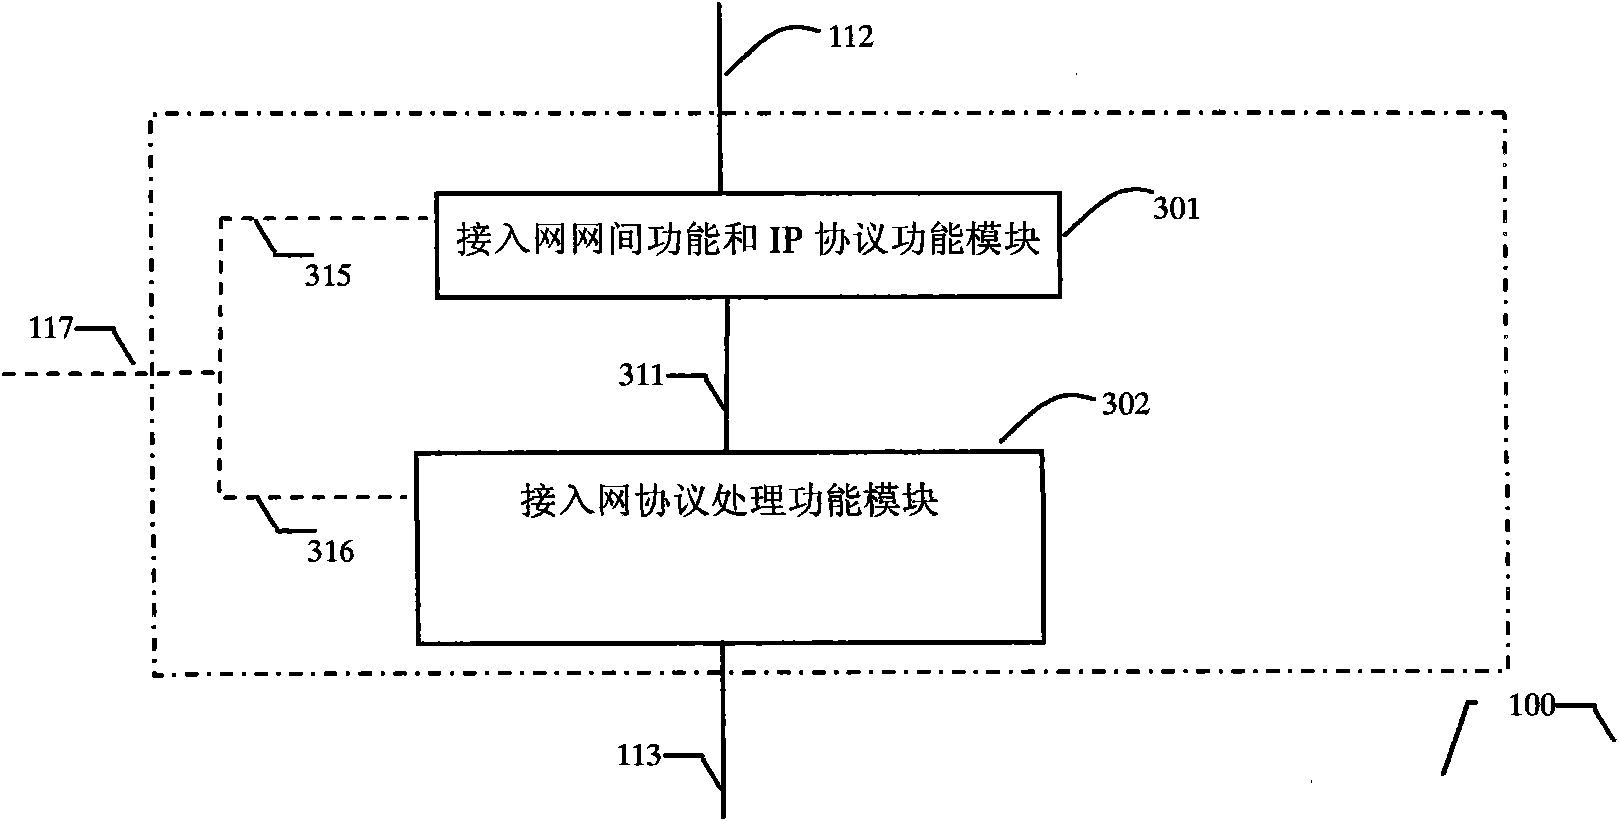 Multi-function wireless access equipment and wireless access method thereof